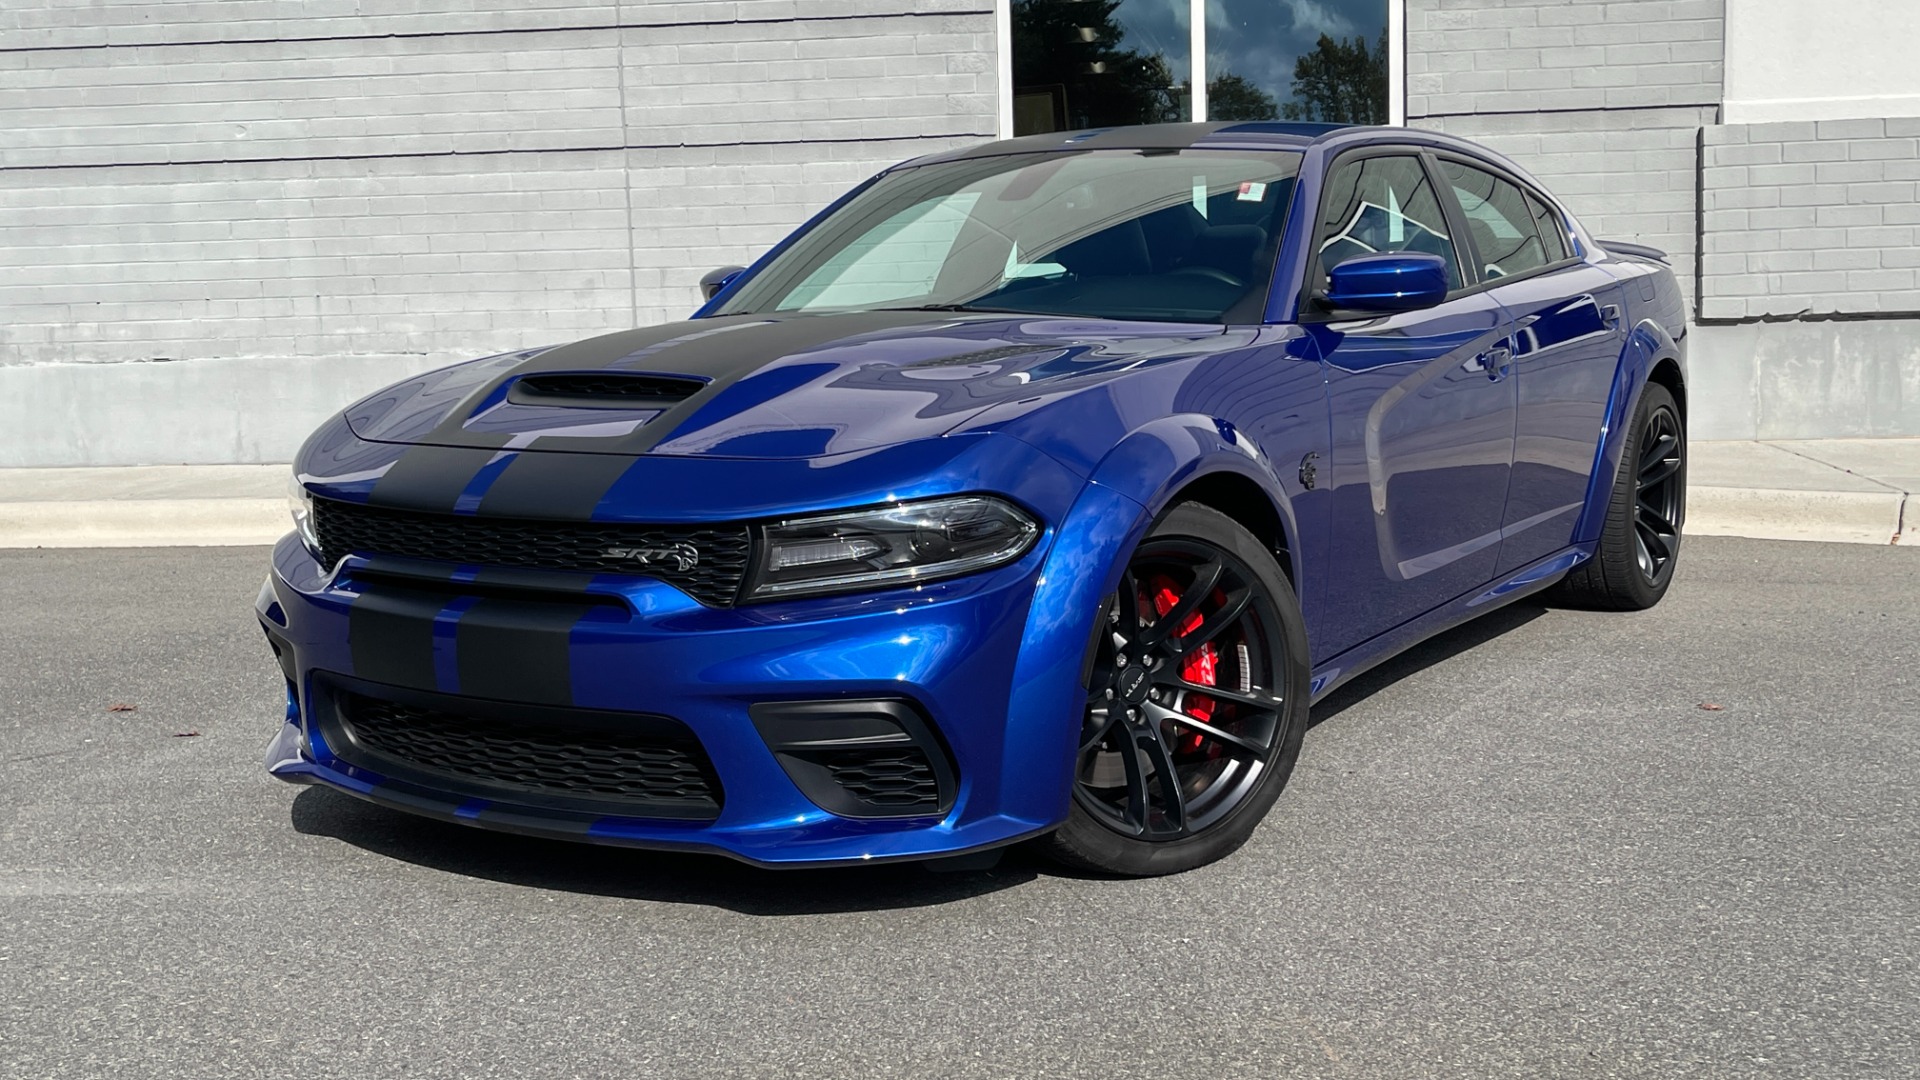 Used 2021 Dodge Charger SRT HELLCAT WIDEBODY / RED KEYS / CARBON STRIPES / 717HP / BREMBO BRAKES for sale $82,995 at Formula Imports in Charlotte NC 28227 3